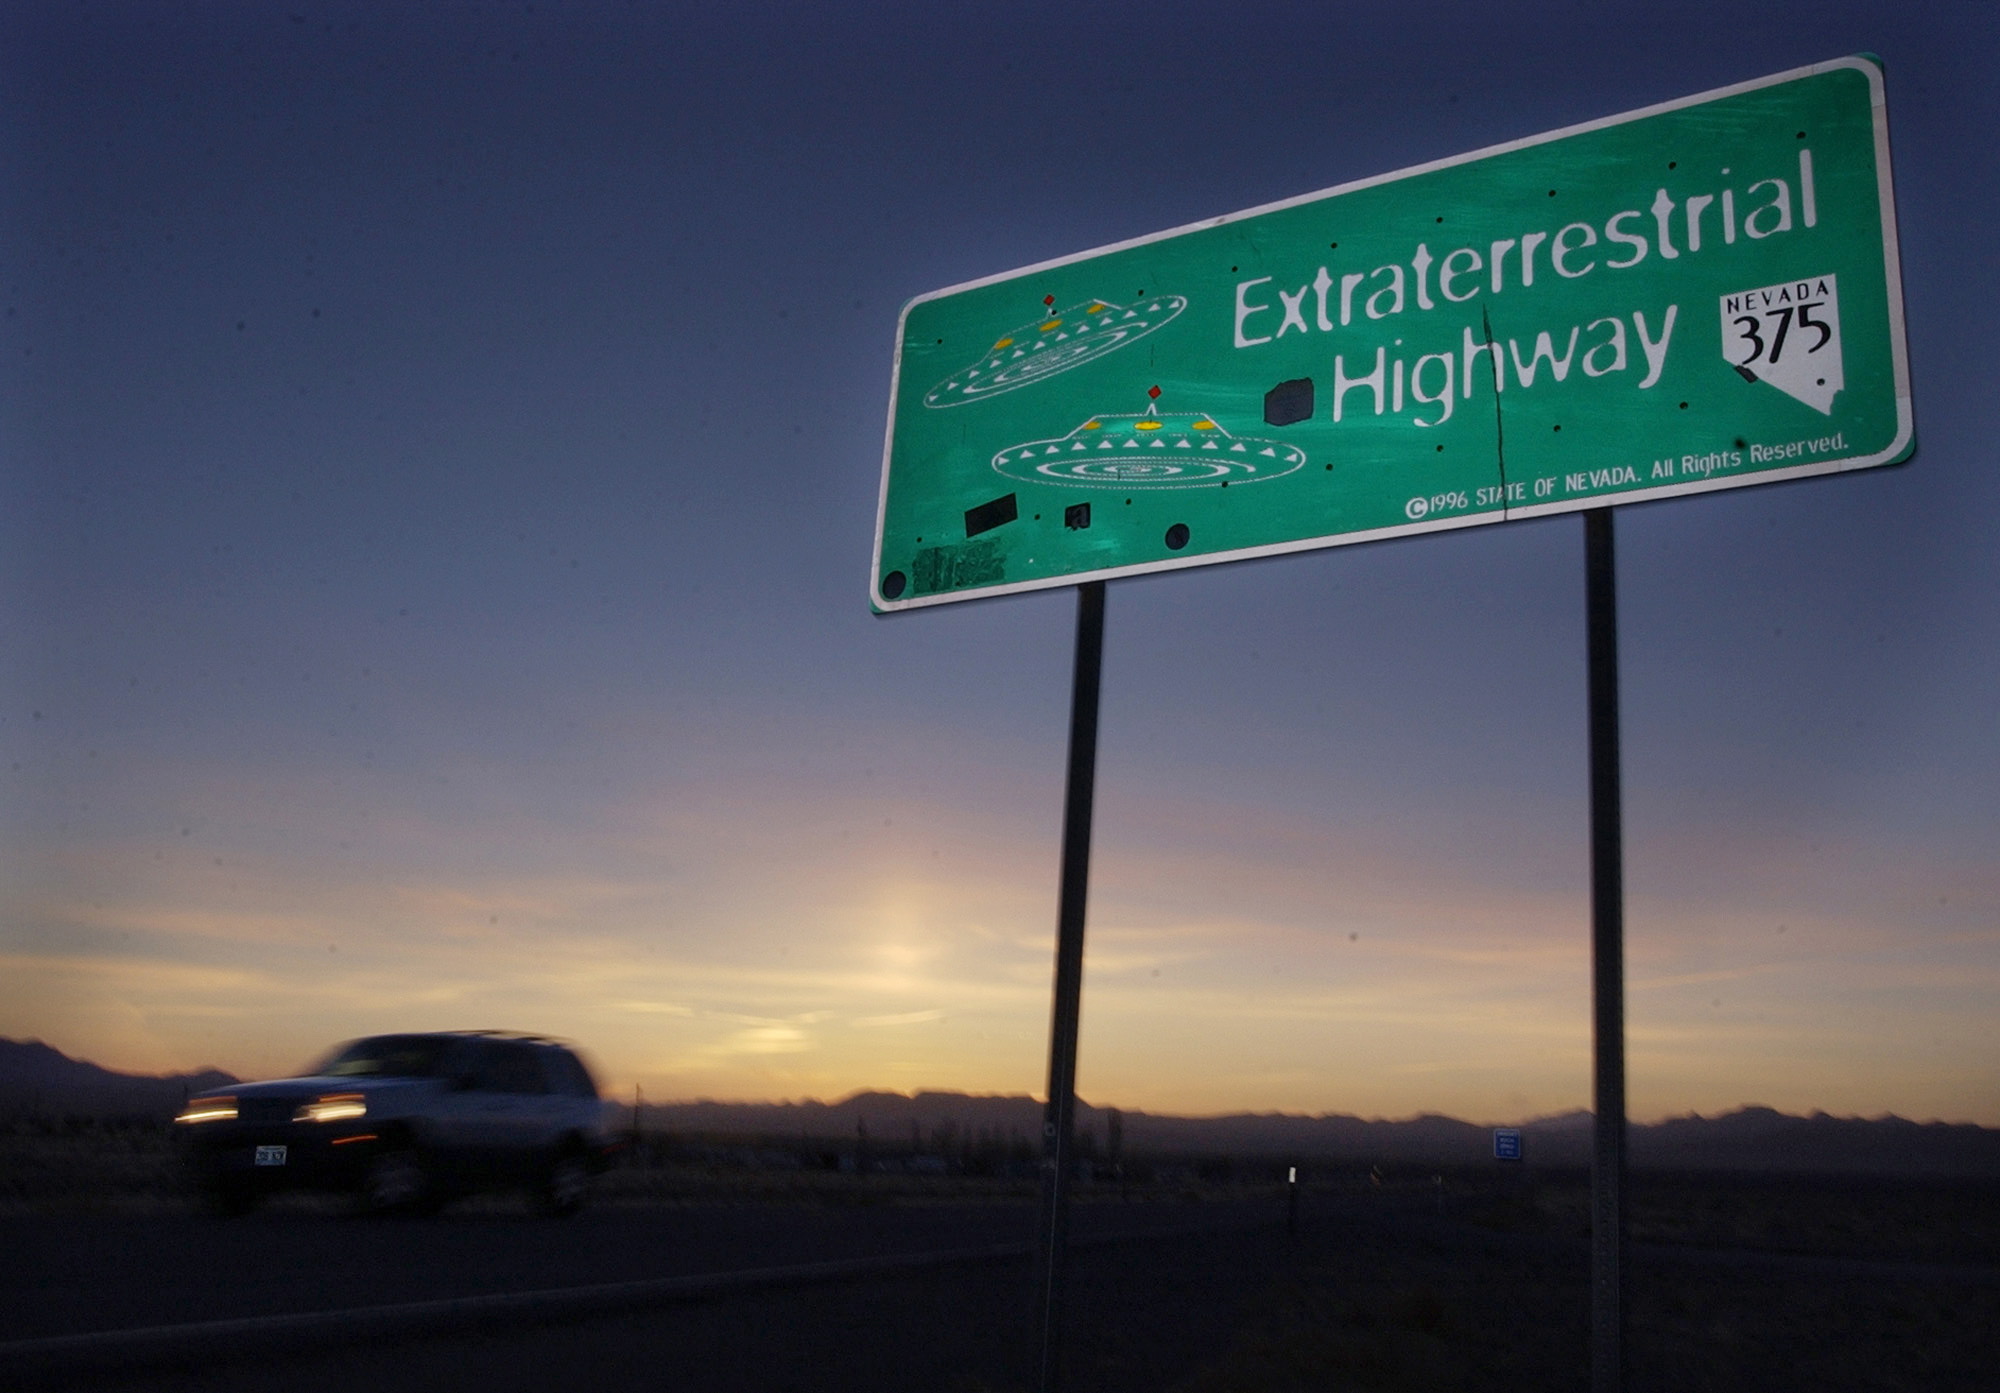 A car moves along the Extraterrestrial Highway near Rachel, Nevada, in this Wednesday, April 10, 2002 file photo. The ET highway was established by the Nevada Legislature in 1996 and runs along the eastern border of Area 51, a military base on the Nevada Test Site.